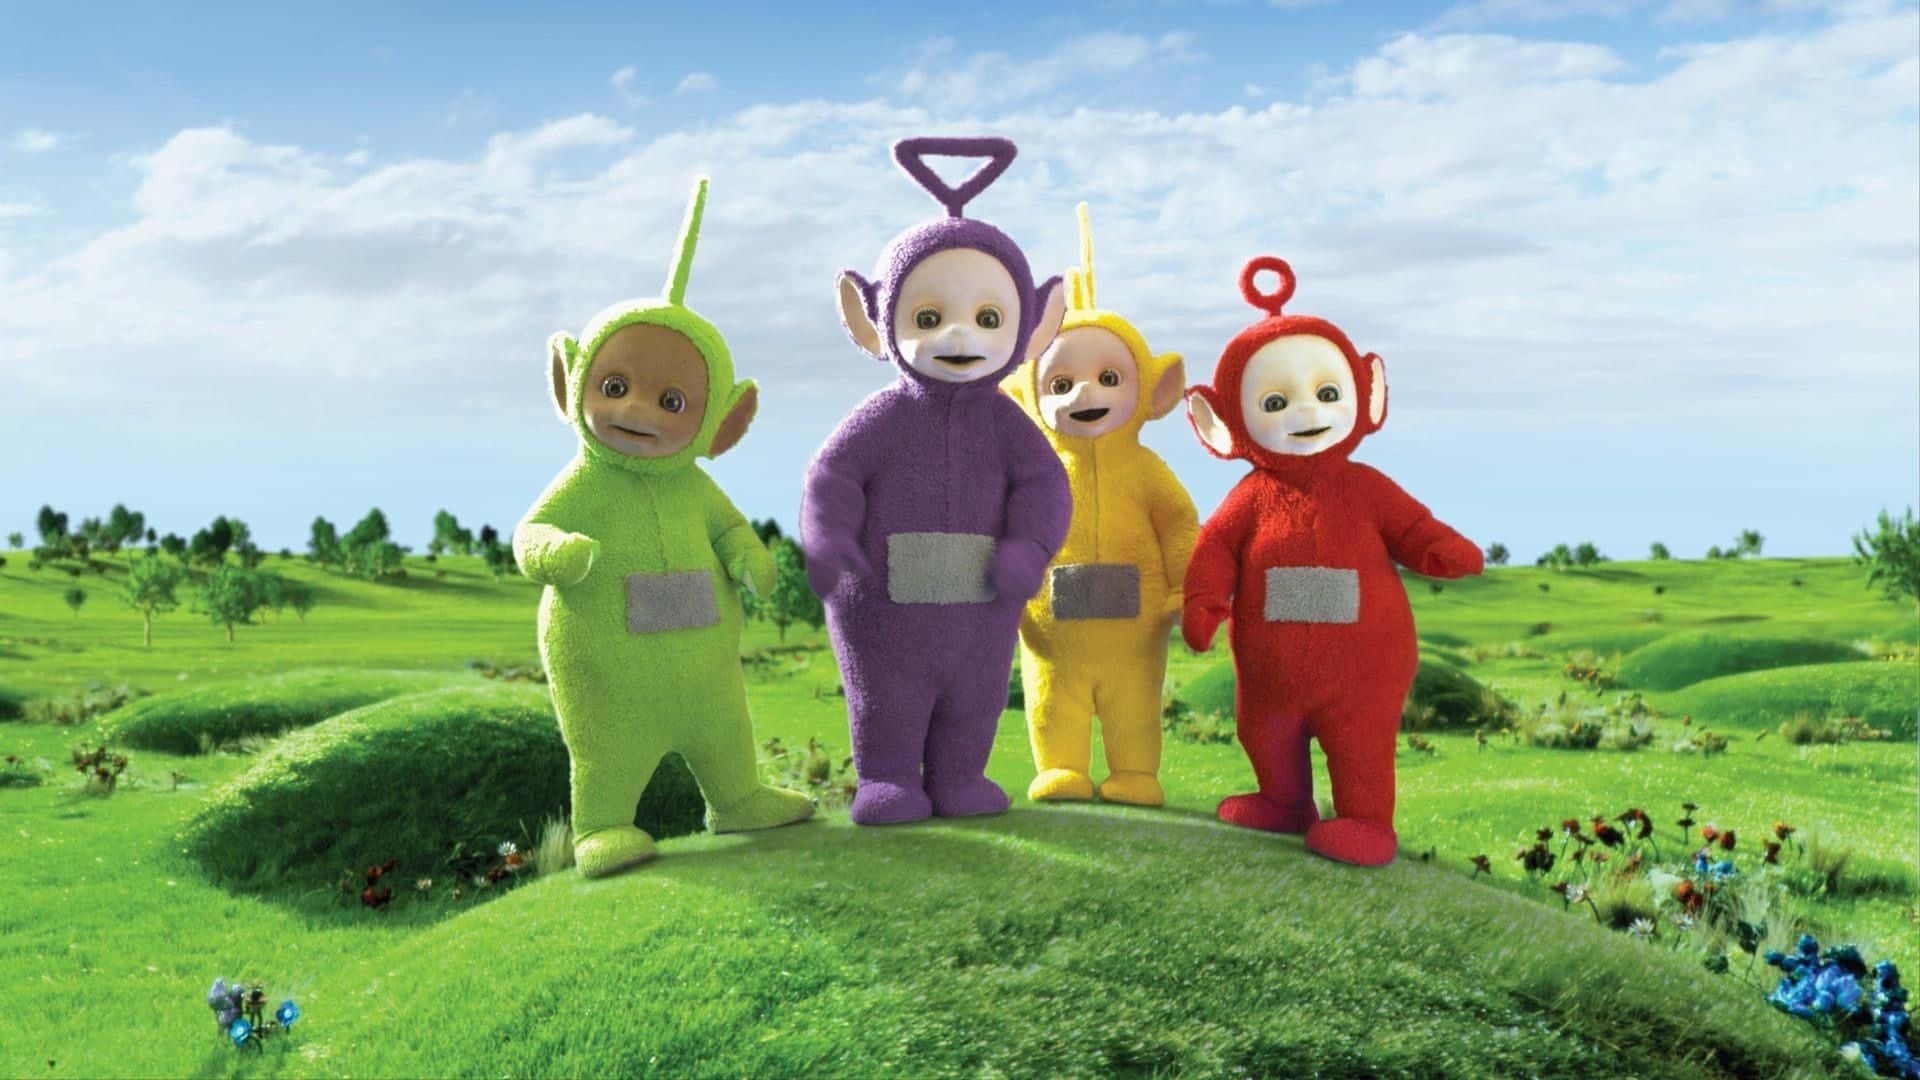 Enjoy watching the fun and vibrant adventures of the Teletubbies